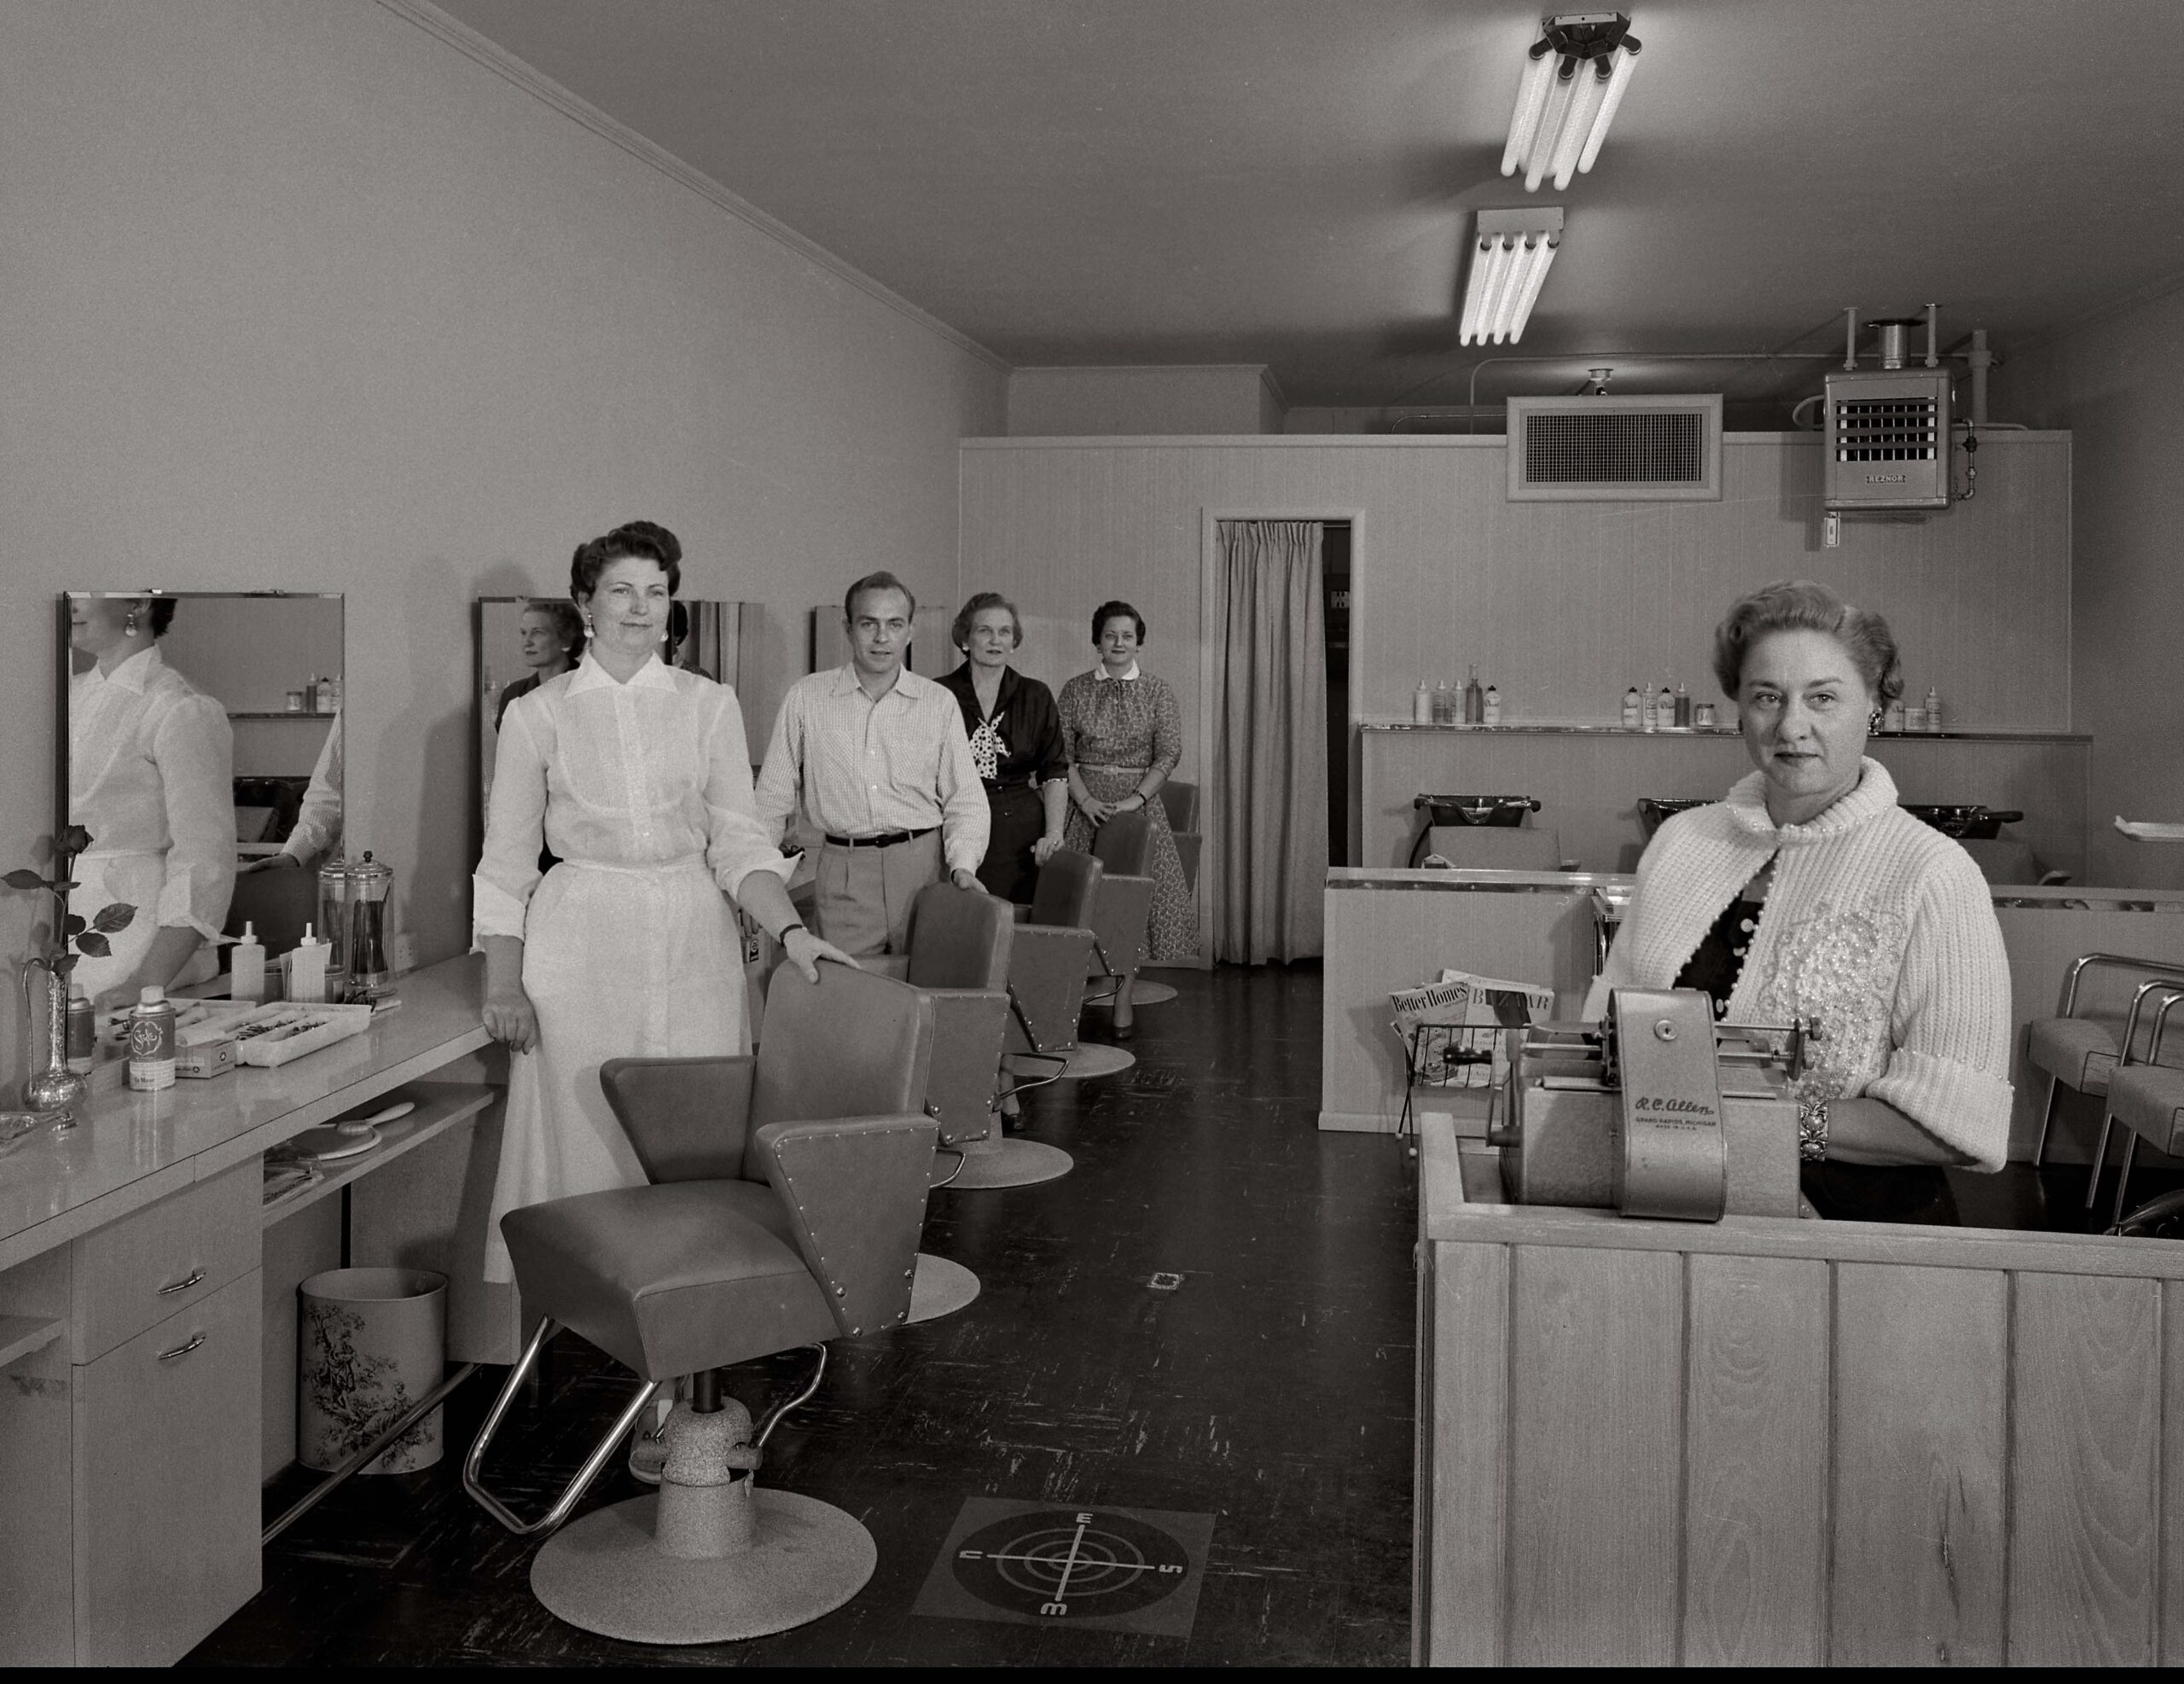 At the Westcliff Hair Salon in south Fort Worth in 1952, hairdressers line up at their work stations while a co-worker stands ready to check out customers.